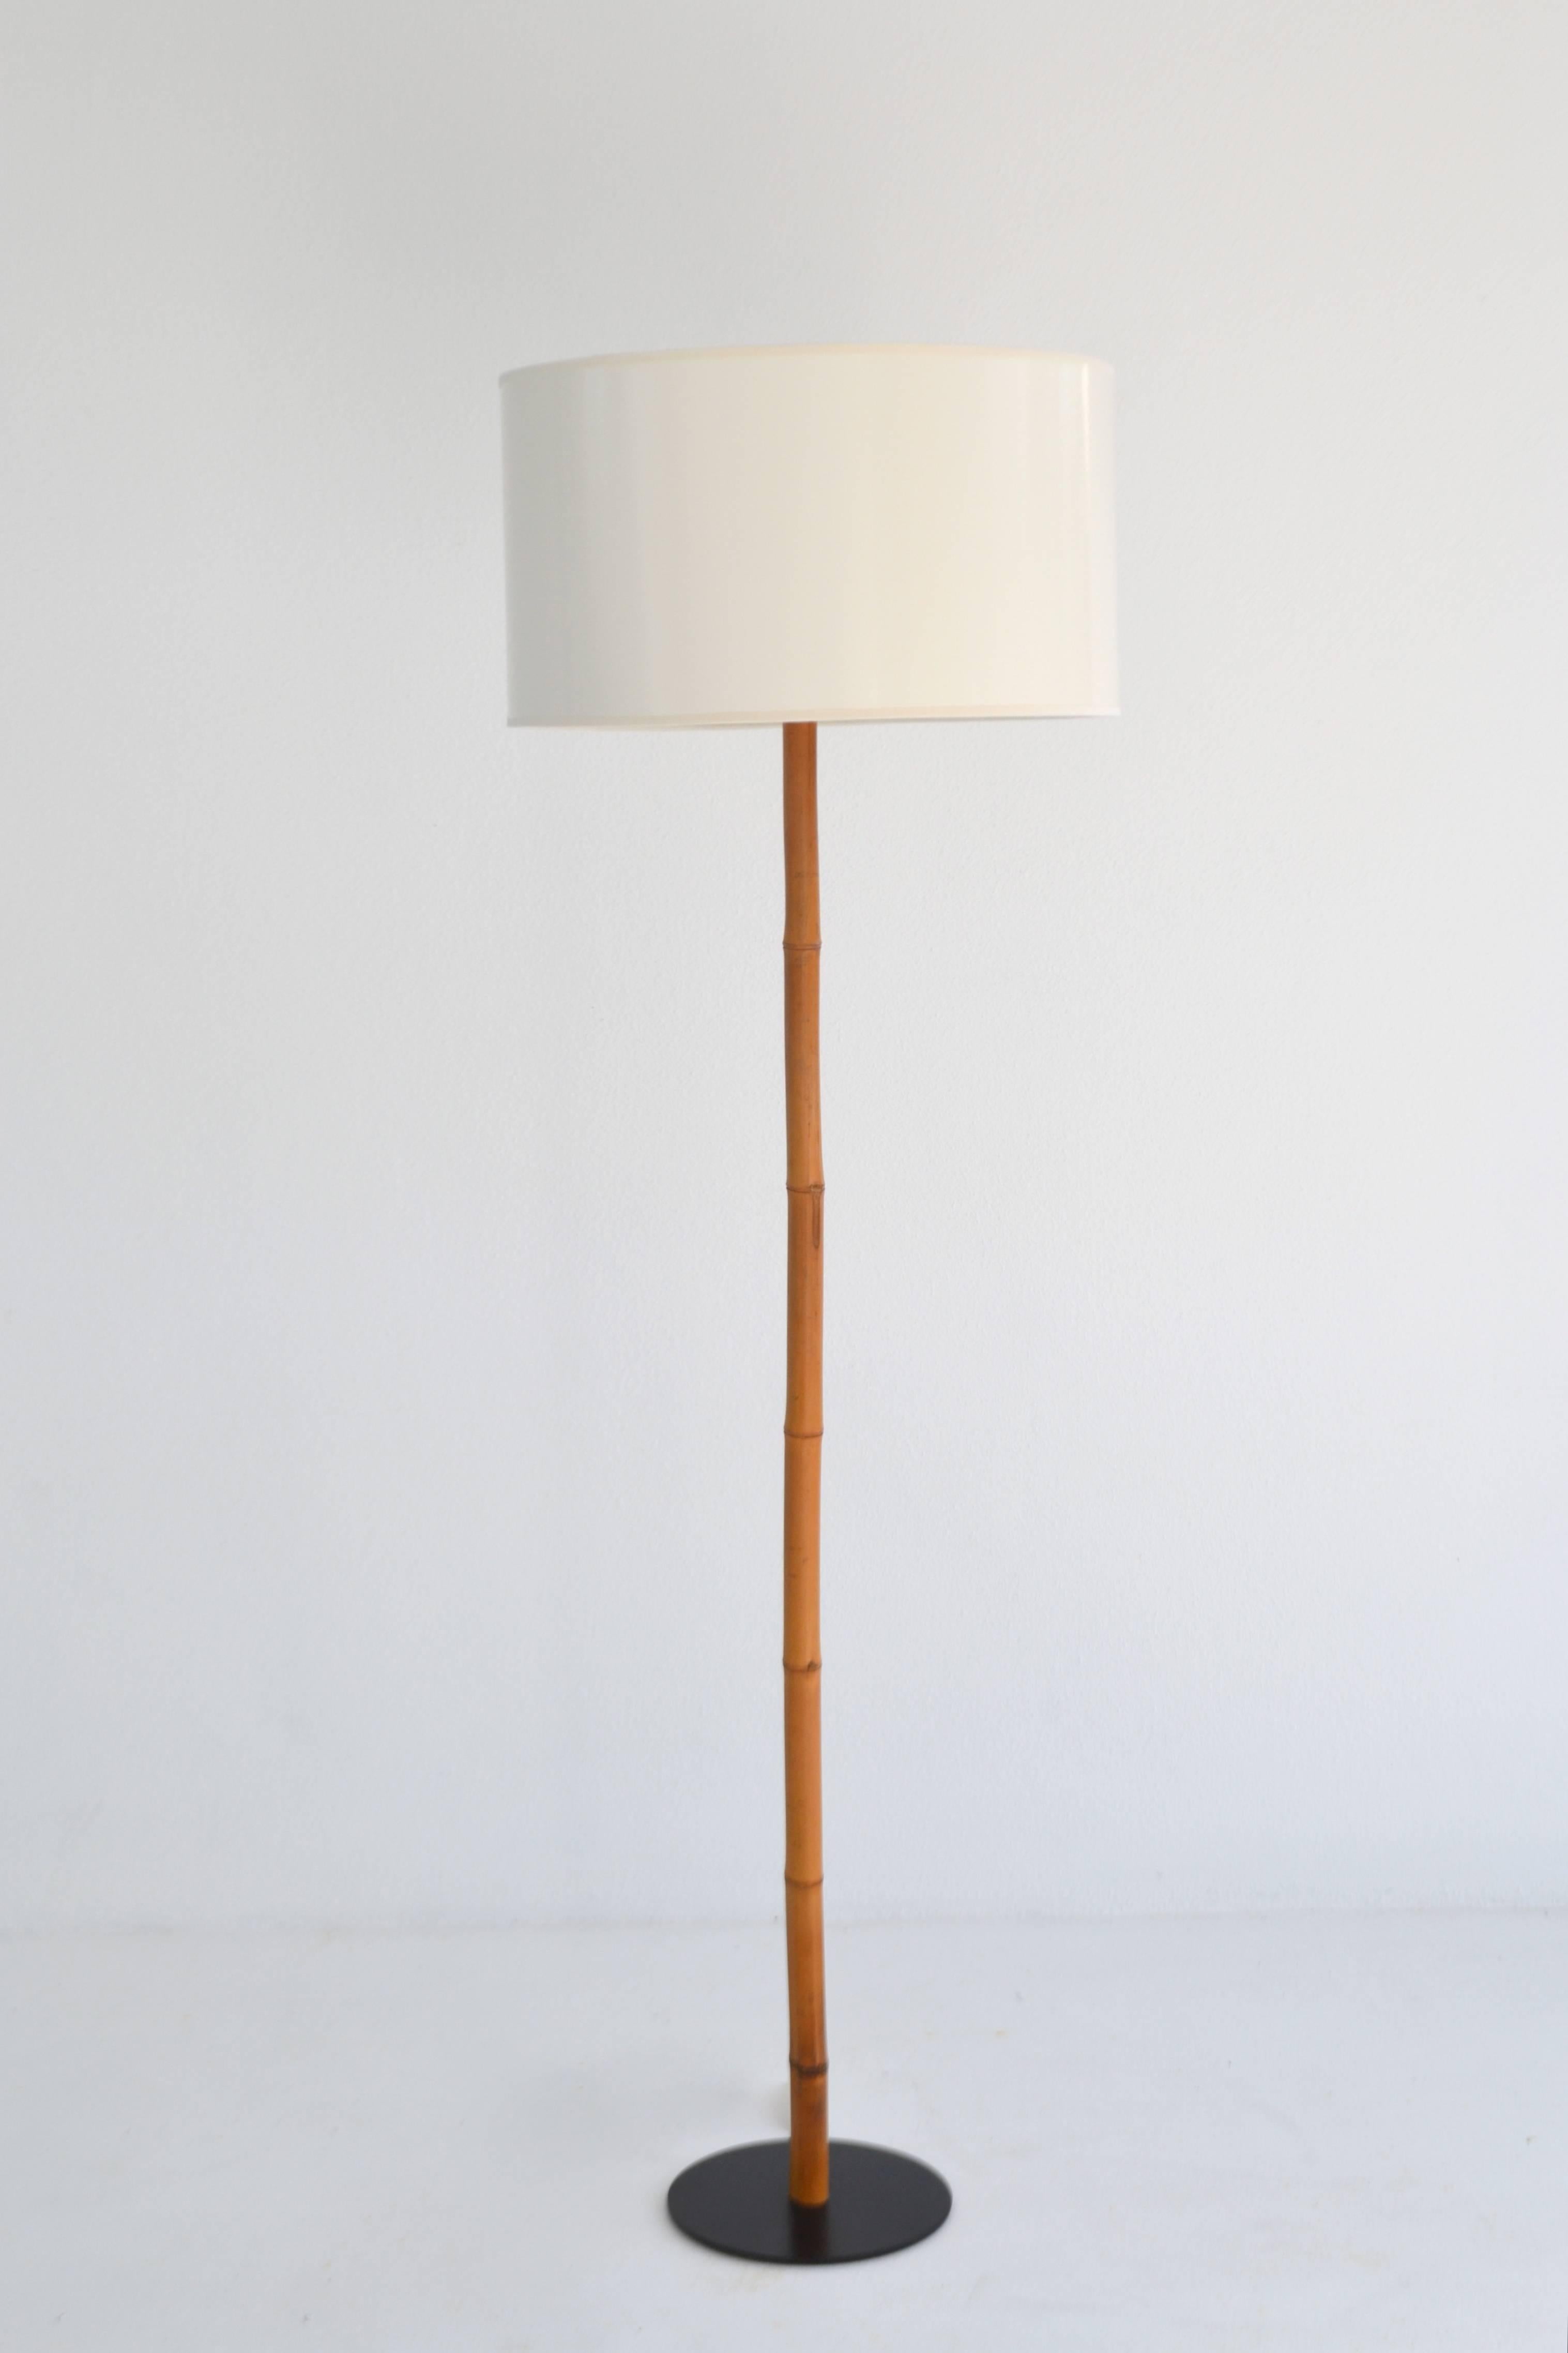 Late 20th Century Mid-Century Bamboo Floor Lamp by George Kovacs For Sale